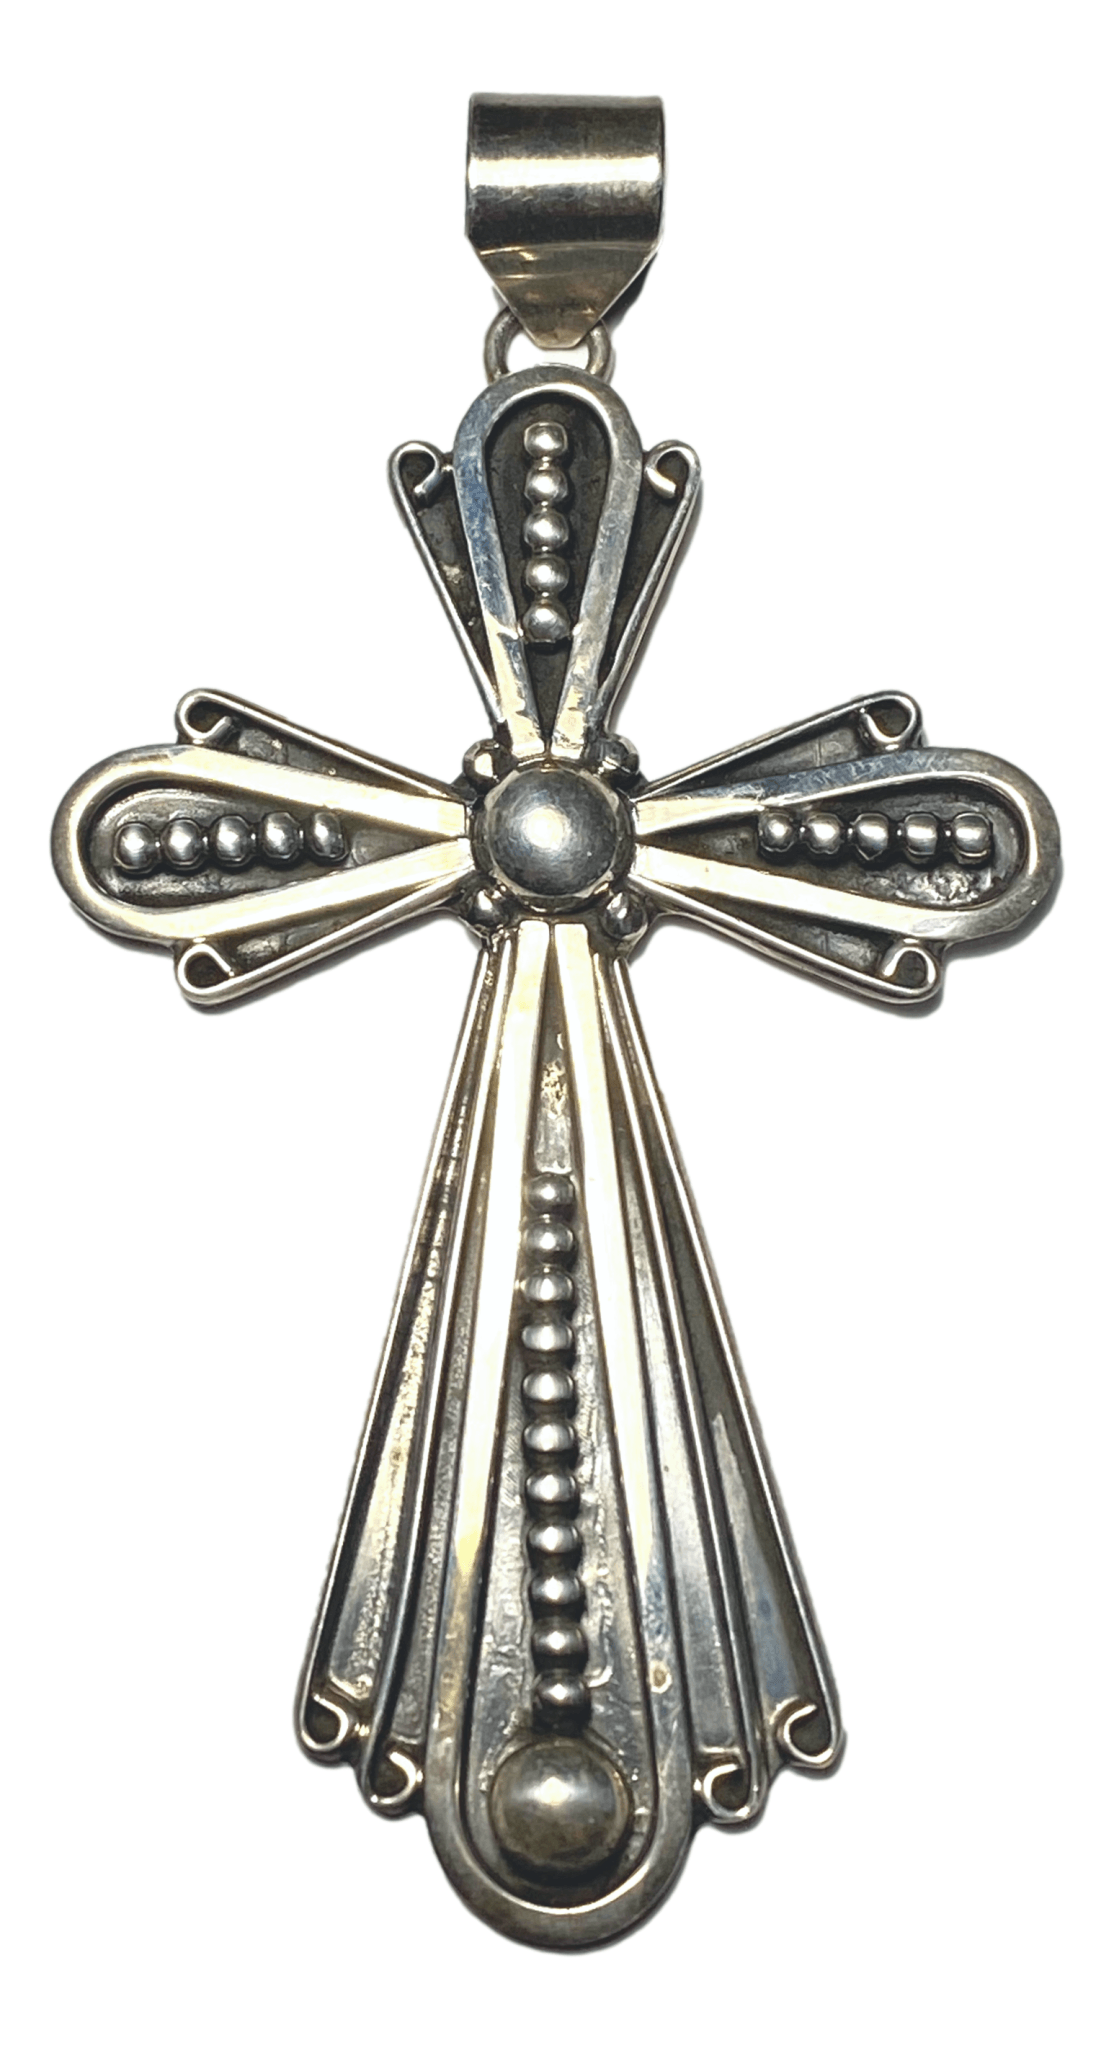 Pendant Cross Sterling Silver Soft Edge Sunburst Design Handcrafted by New Mexico Artisan Lorena 3 1/2 L x 2 W inches - Ysleta Mission Gift Shop- VOTED El Paso's Best Gift Shop